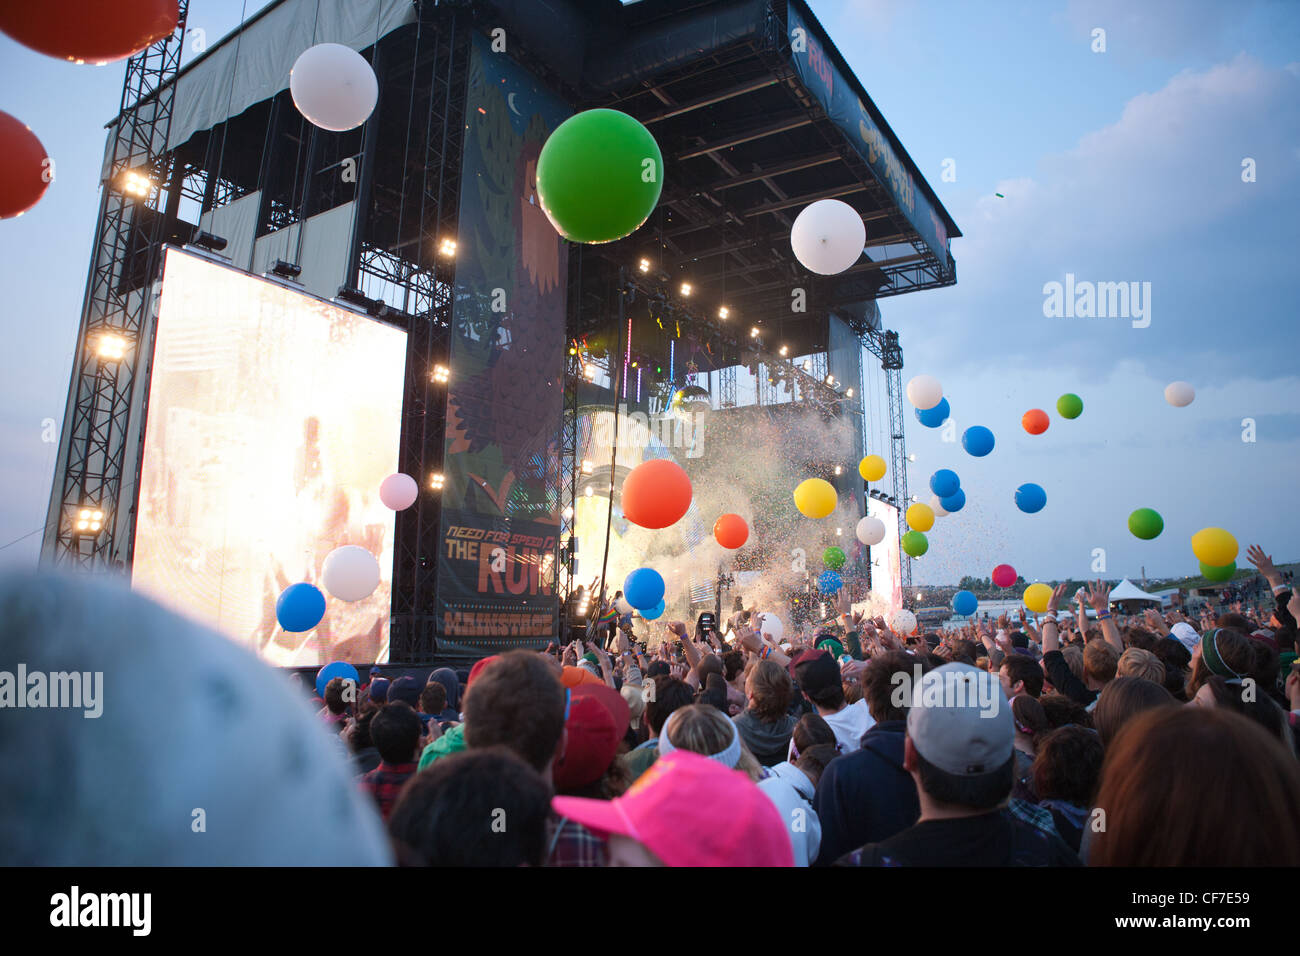 Balloons being released into the audience at Flaming Lips concert. Stock Photo